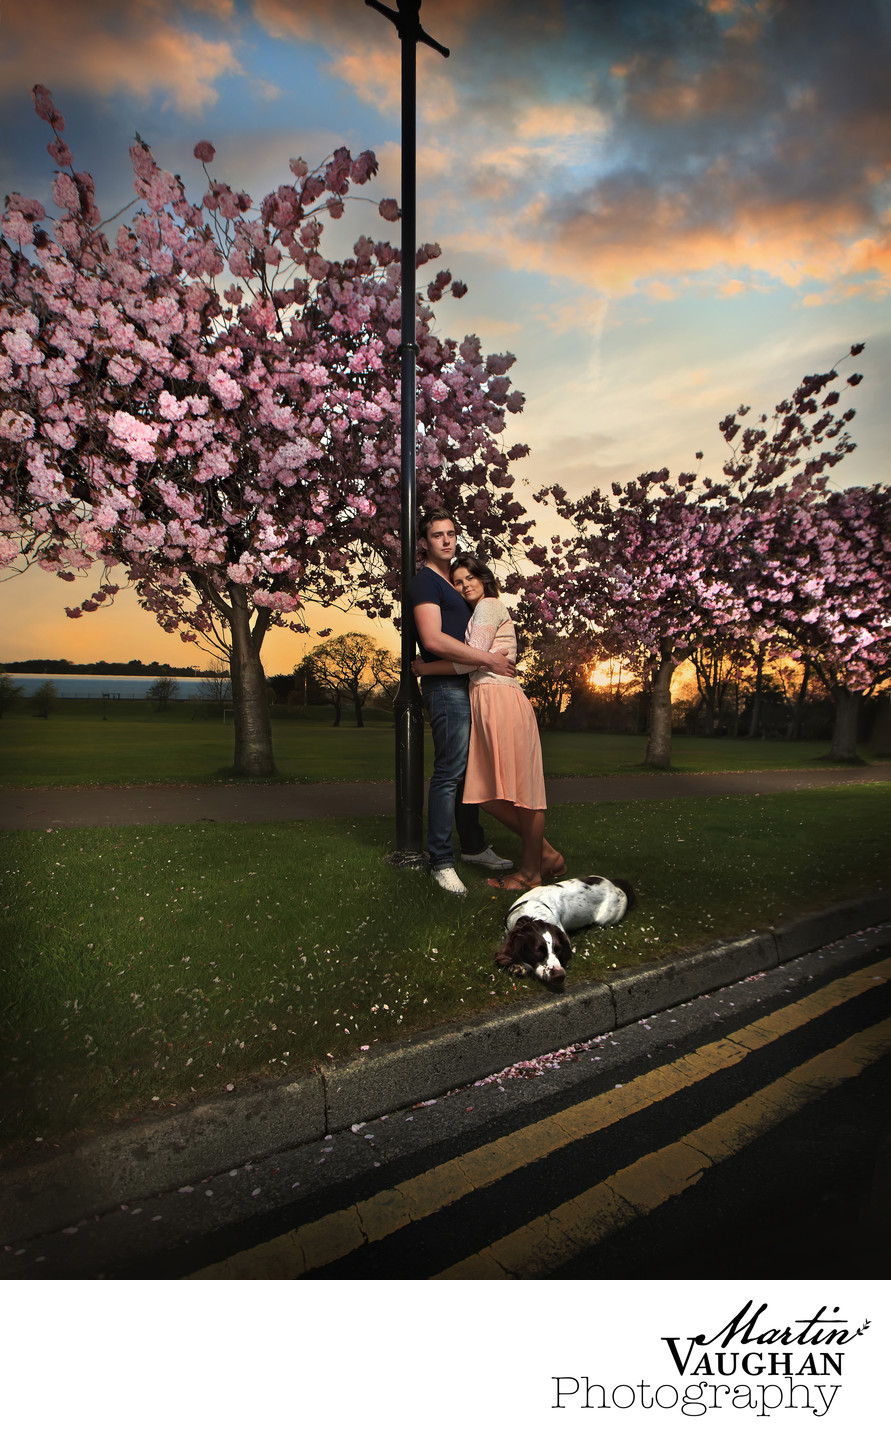 Martin Vaughan engagement shoot in Colwyn bay